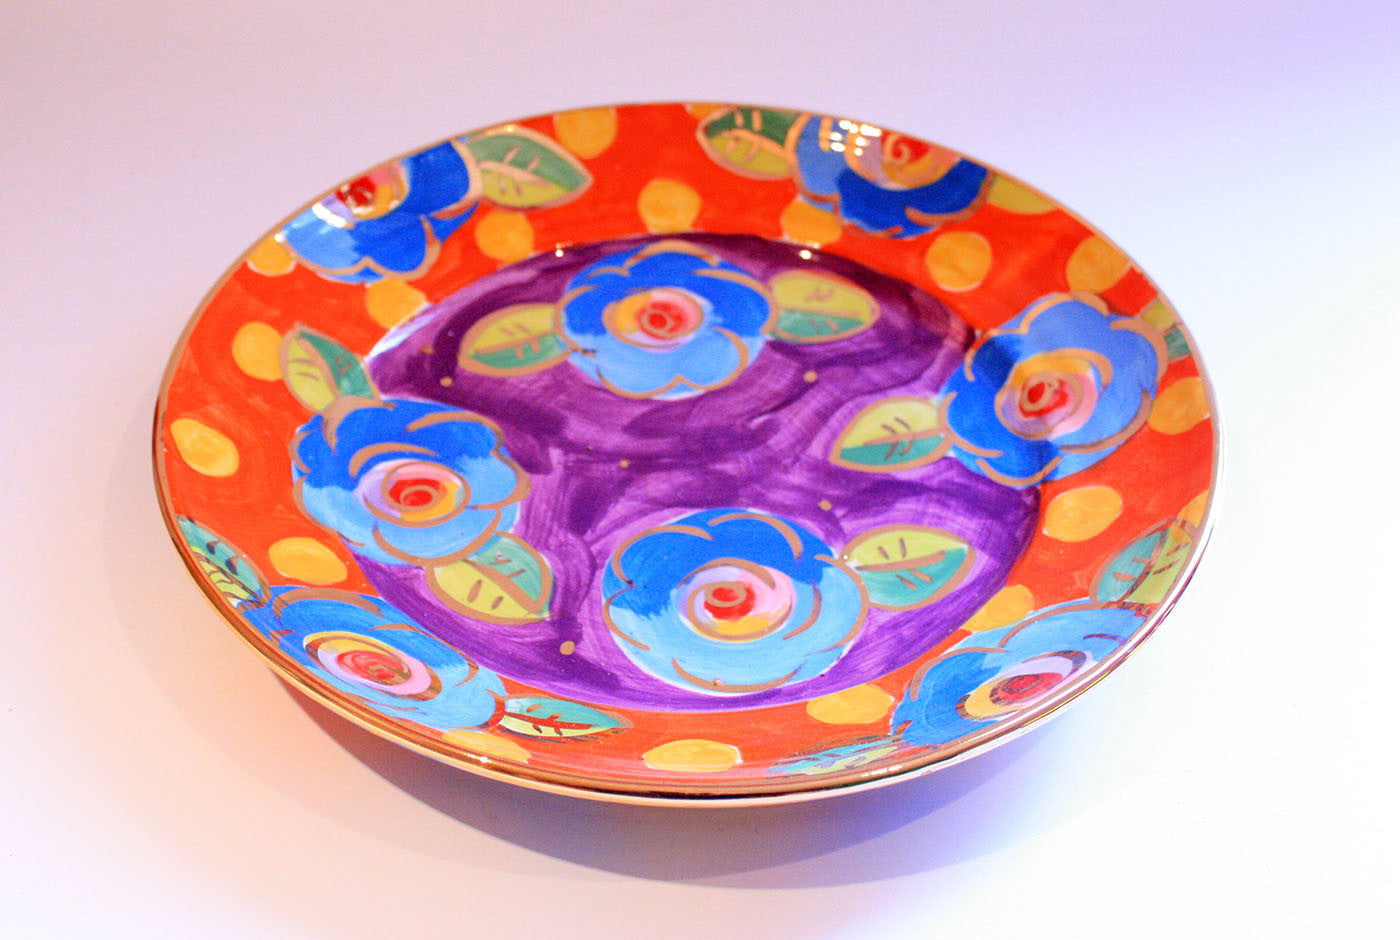 Dinner Plate Roses Purple and Dotty Orange - MaryRoseYoung